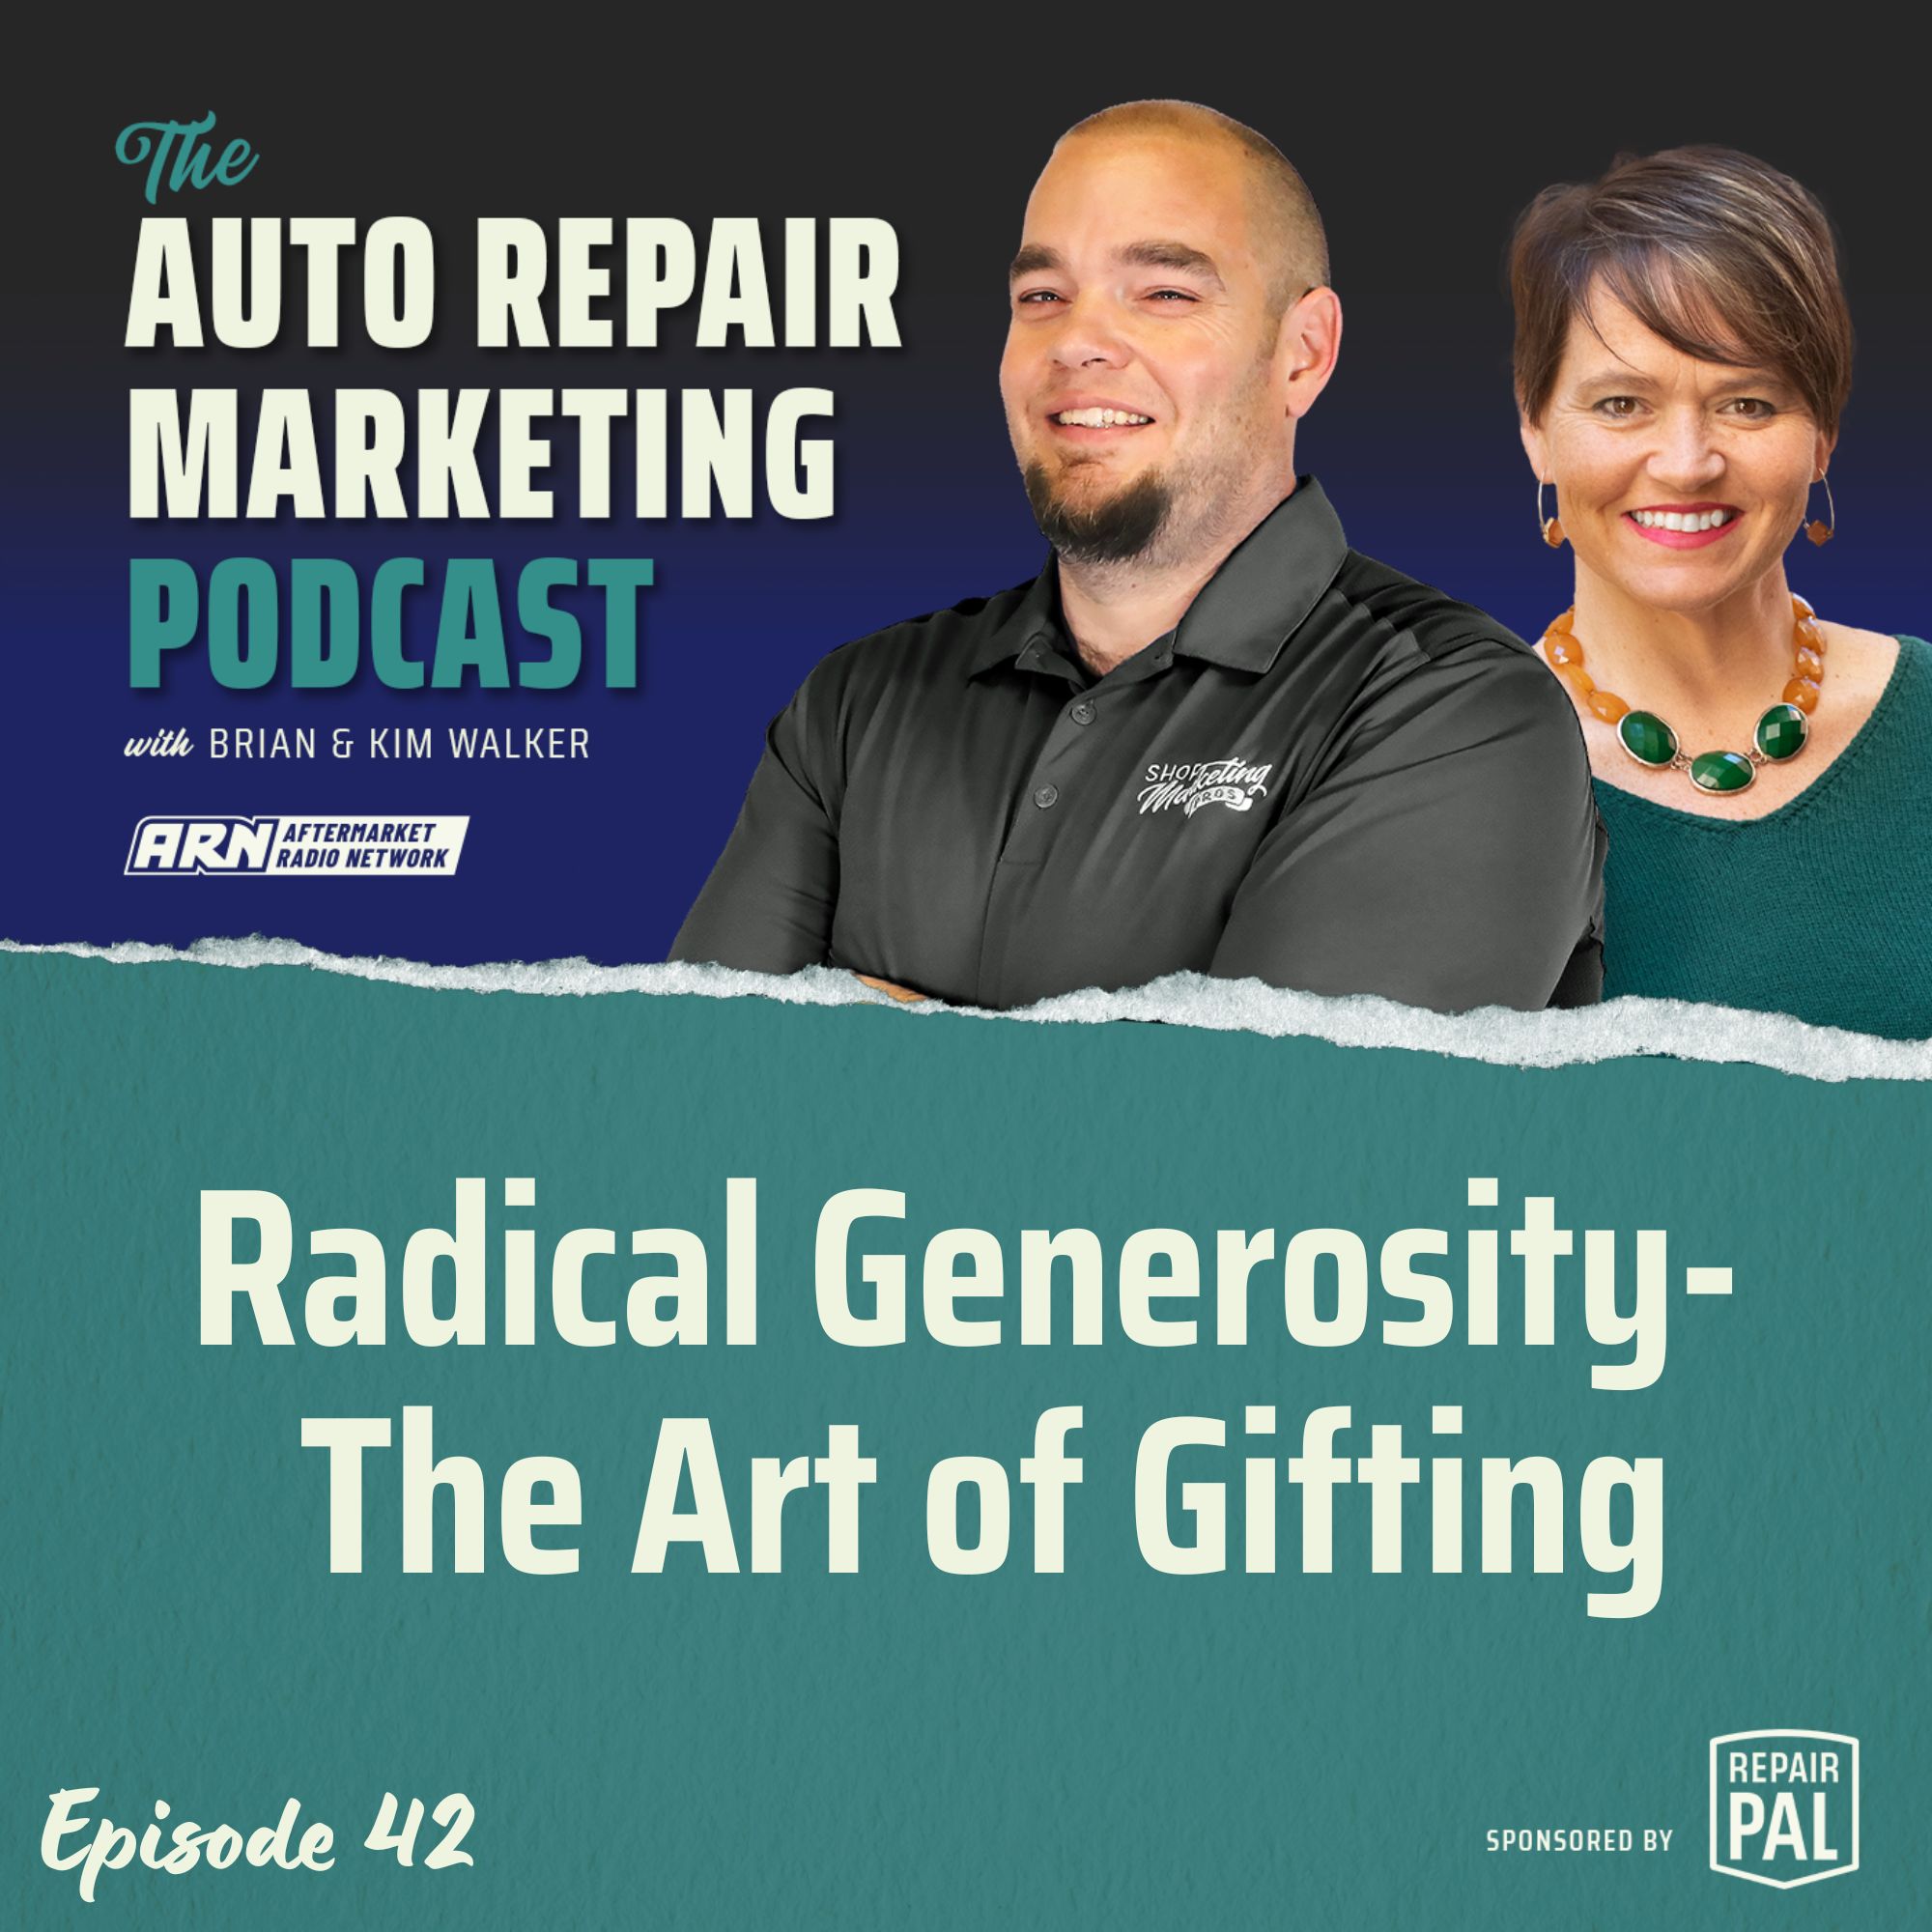 The Auto Repair Marketing Podcast Episode 42. Brian & Kim Walker talking about the topic "Radical Generosity - The Art of Gifting". Sponsored by Repair Pal.